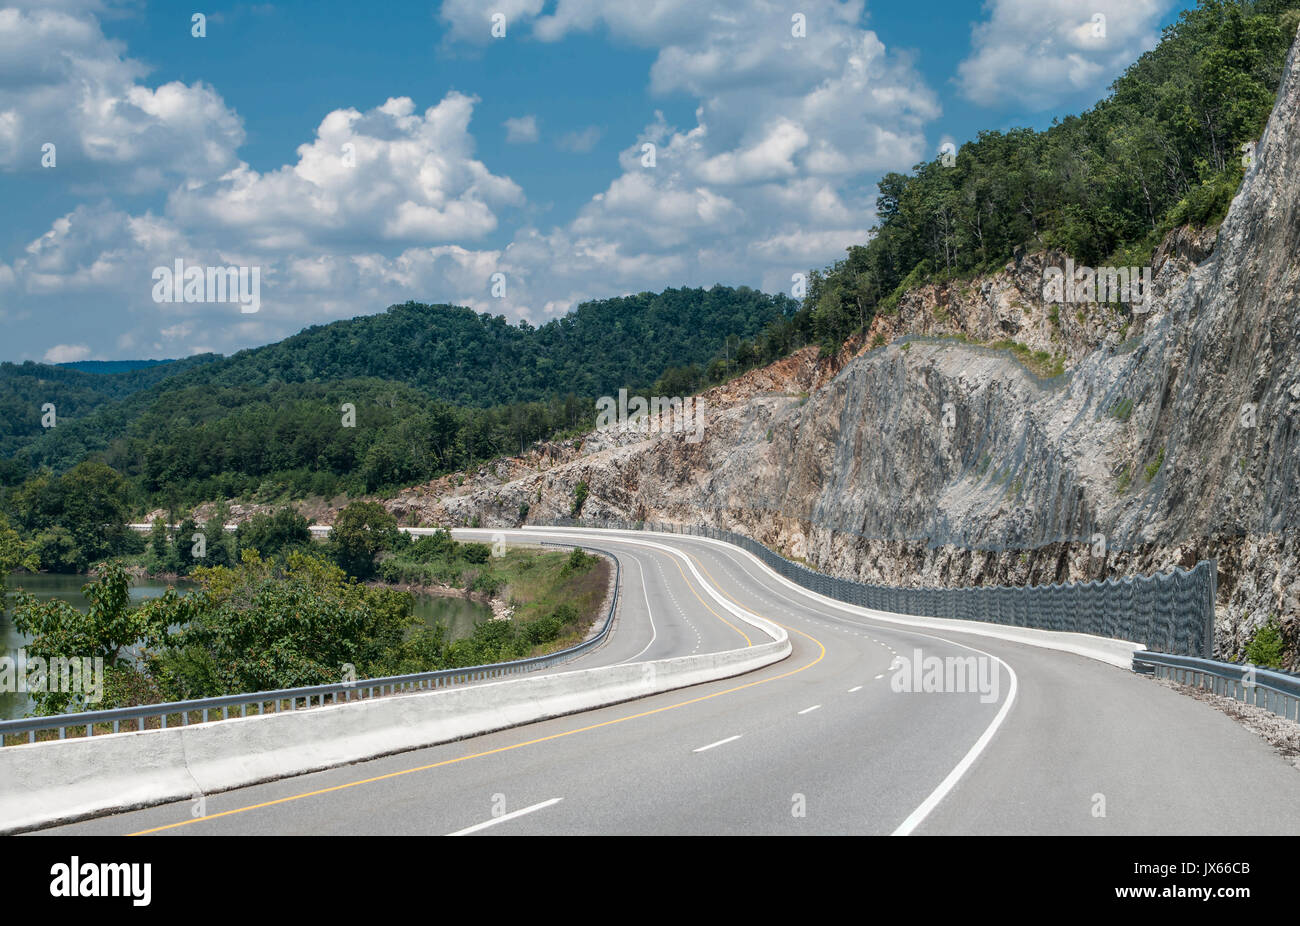 Appalachian Mountain Highway:  A four lane divided highway curves between a winding river and a steep cut rock face in eastern Tennessee. Stock Photo